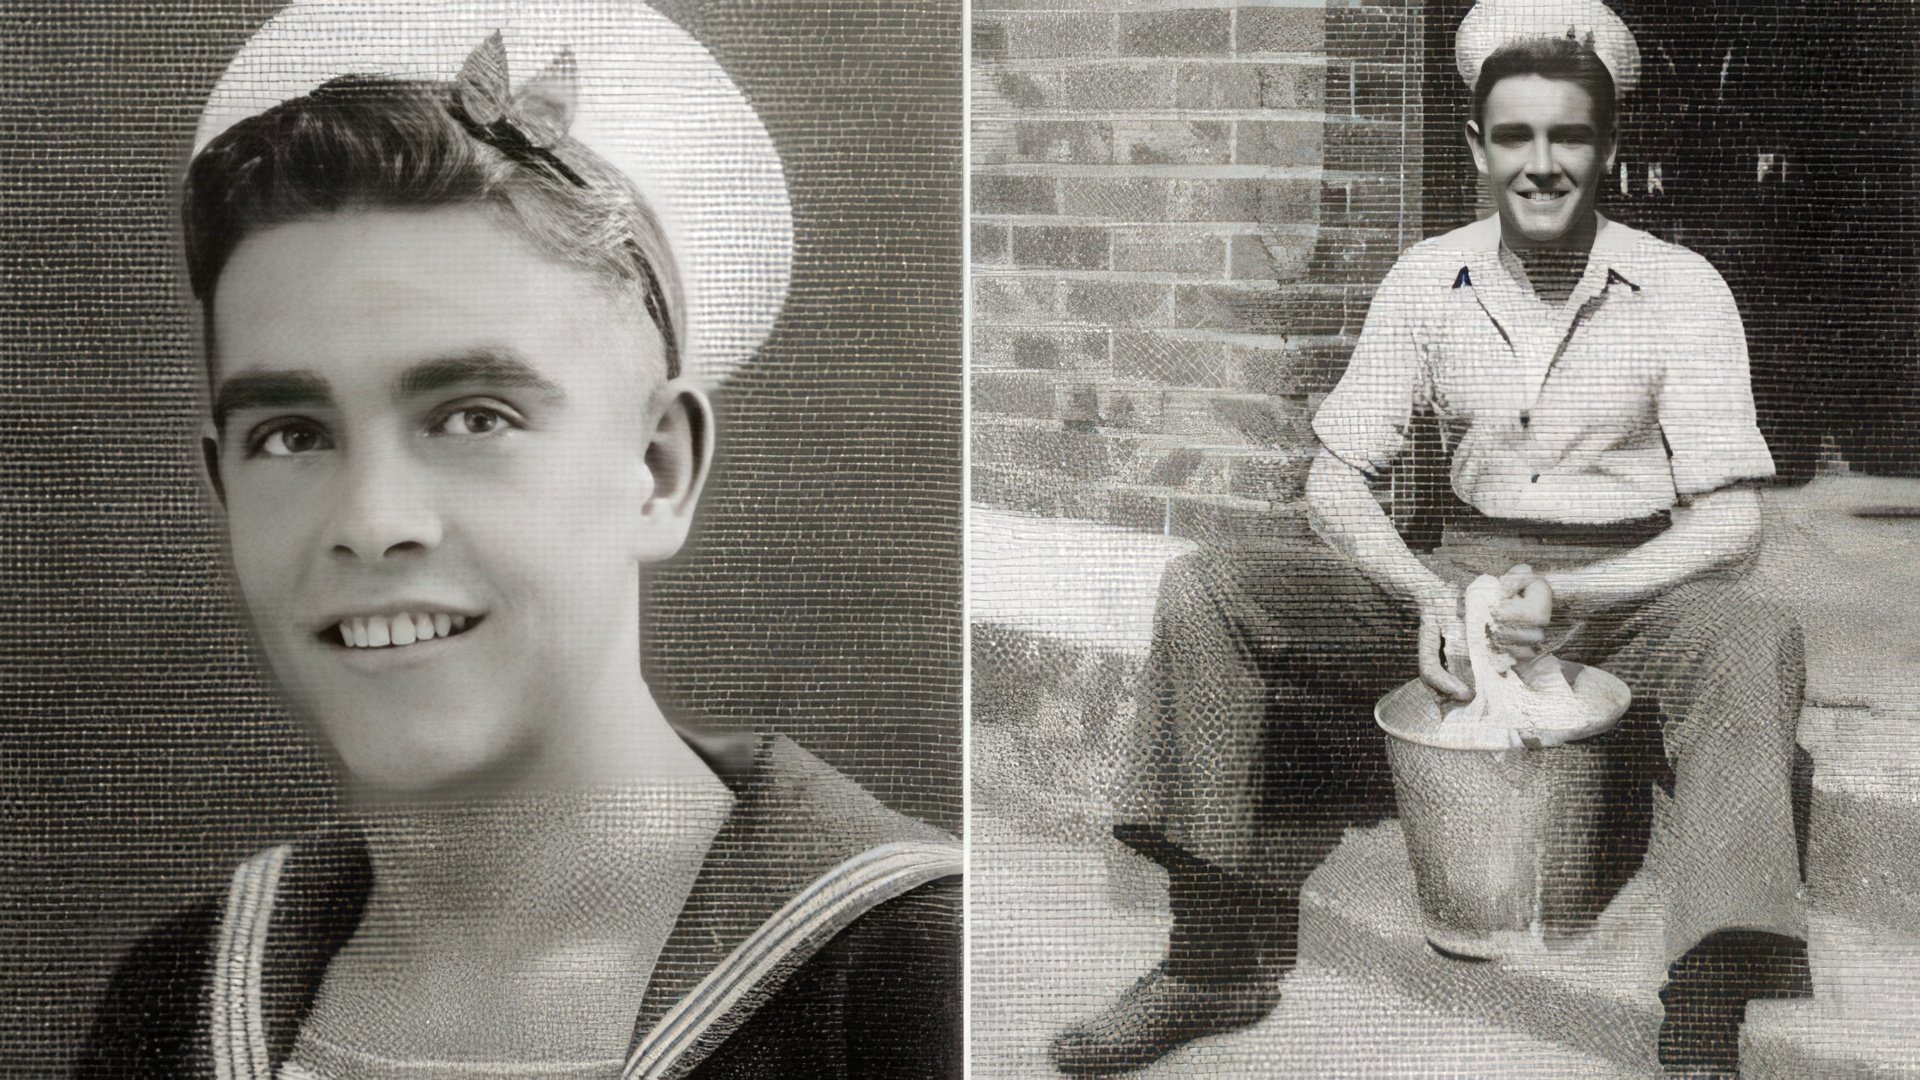 Sean Connery served in the British Navy